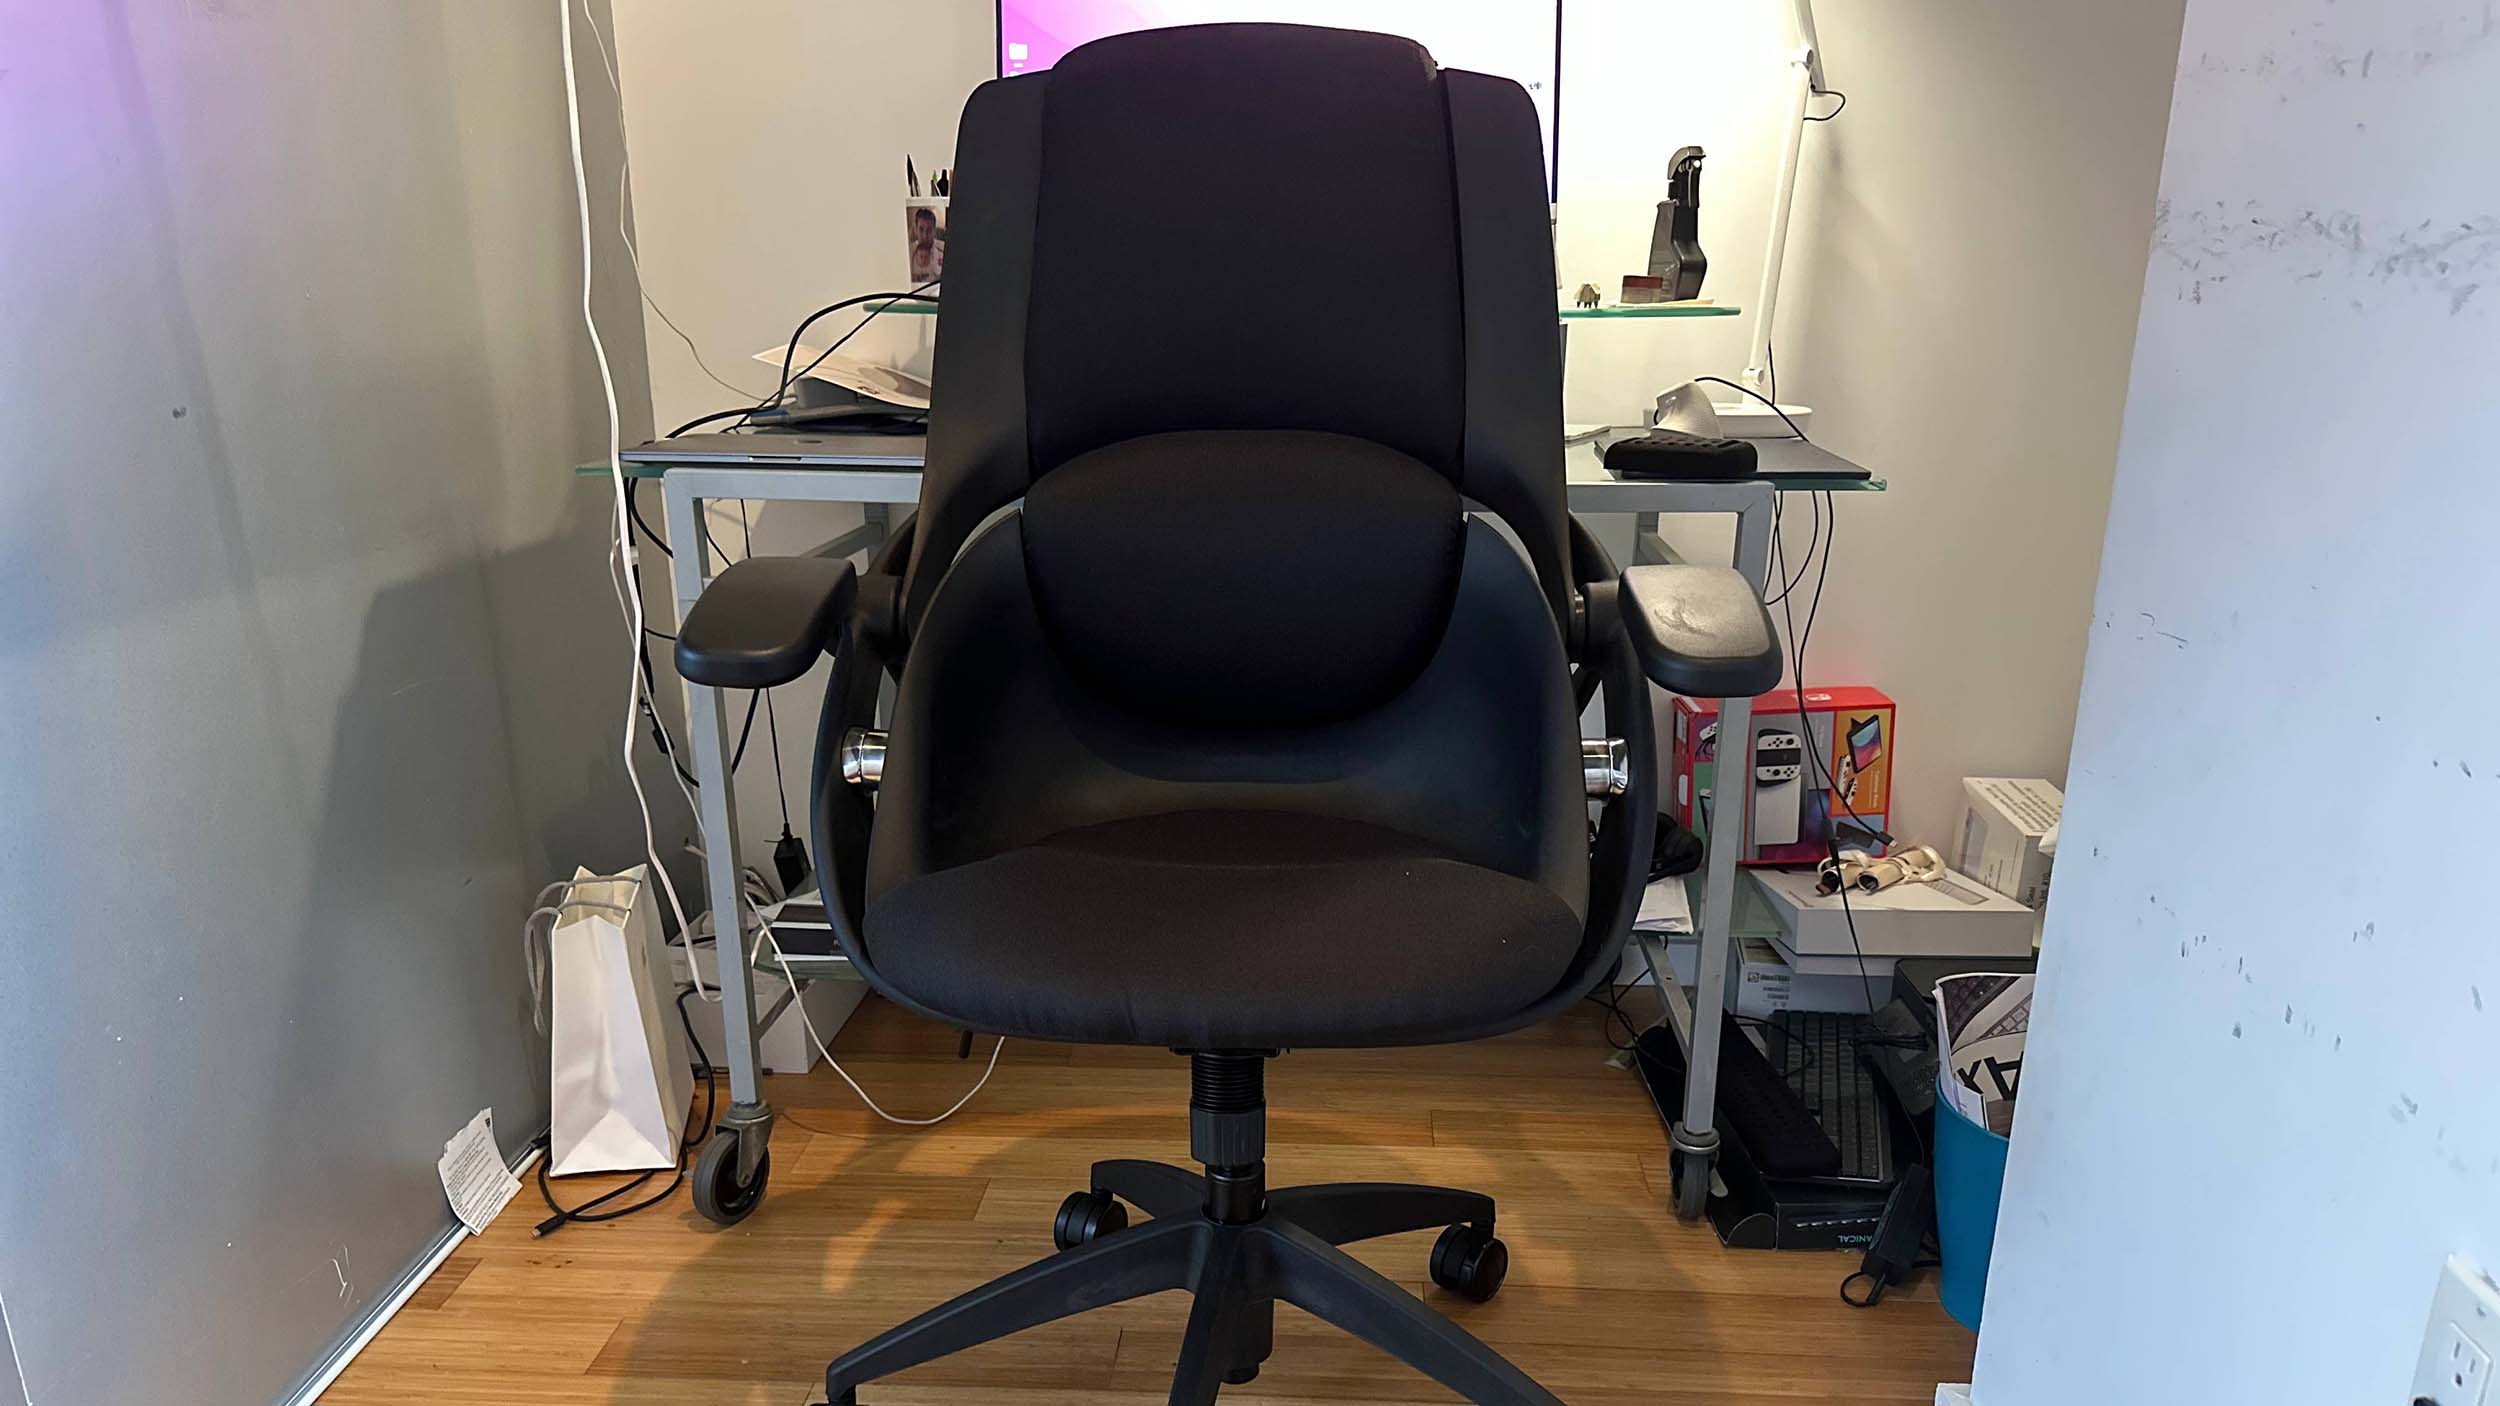 Pil Ælte cilia All33 Axion office chair review | CNN Underscored